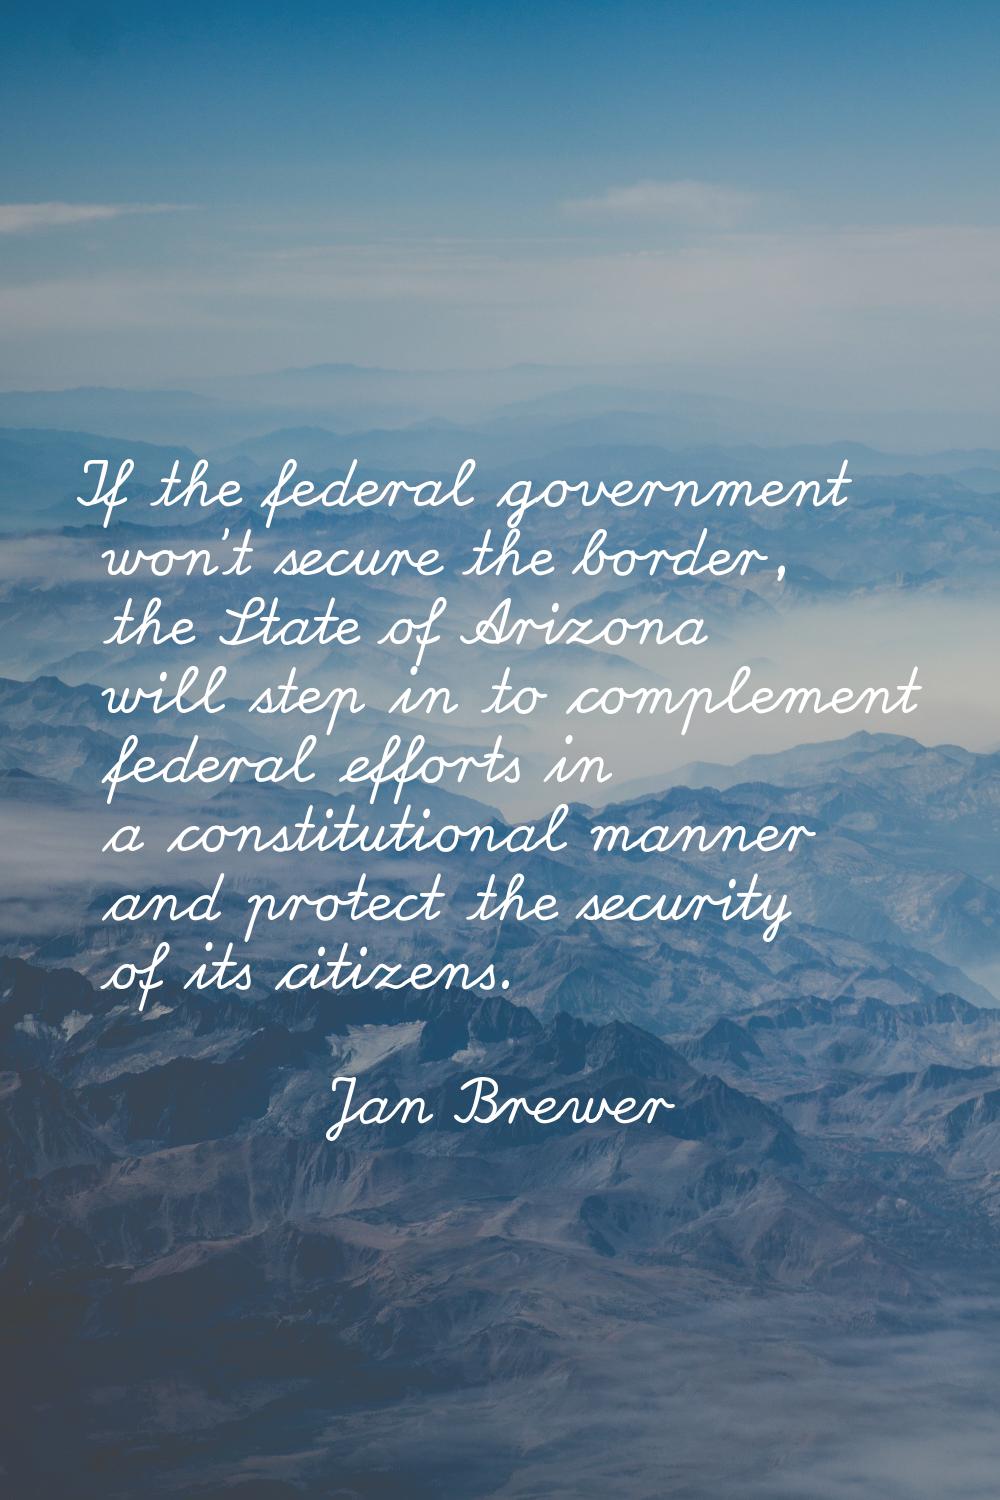 If the federal government won't secure the border, the State of Arizona will step in to complement 